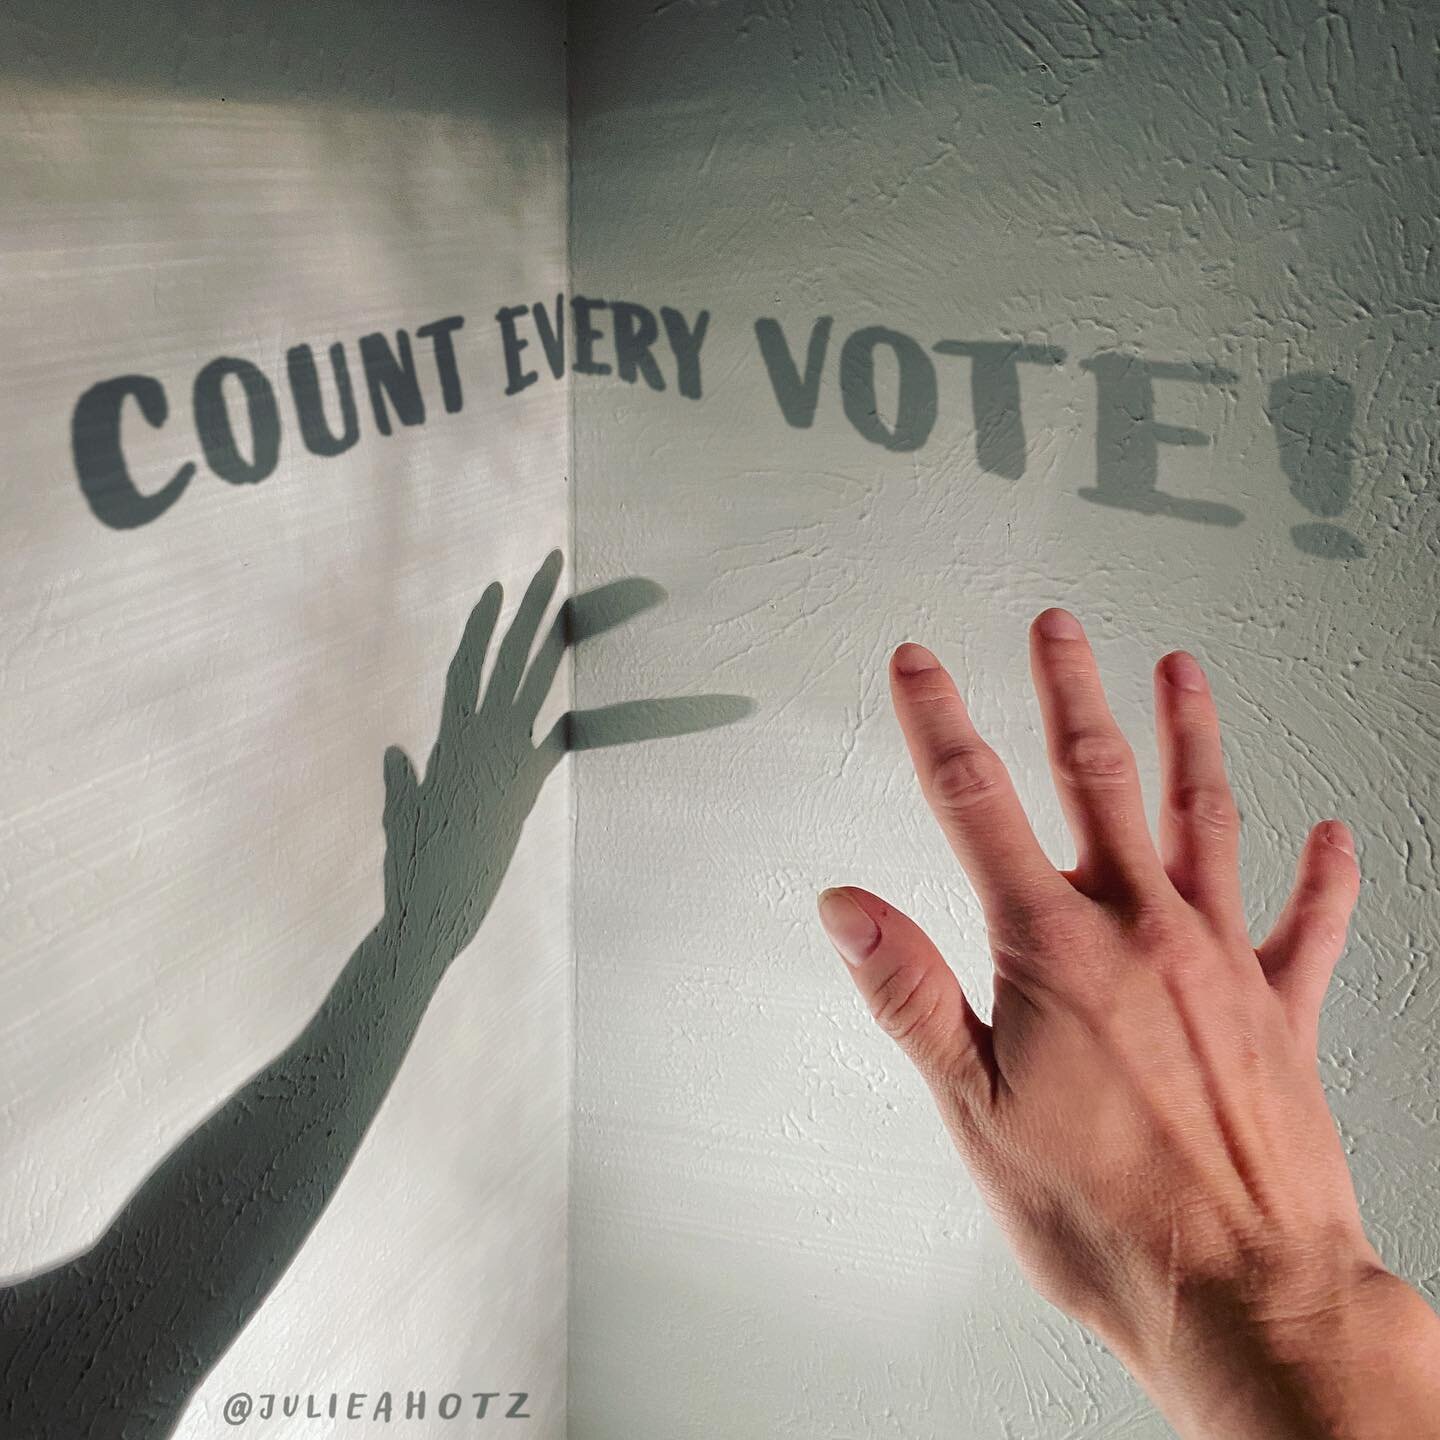 COUNT EVERY VOTE! Whether it&rsquo;s a local, state, or federal election, democracy rests on every vote being counted. Growing up I loved learning about people being able to vote&mdash;that every vote was important. I couldn&rsquo;t wait to turn 18 a